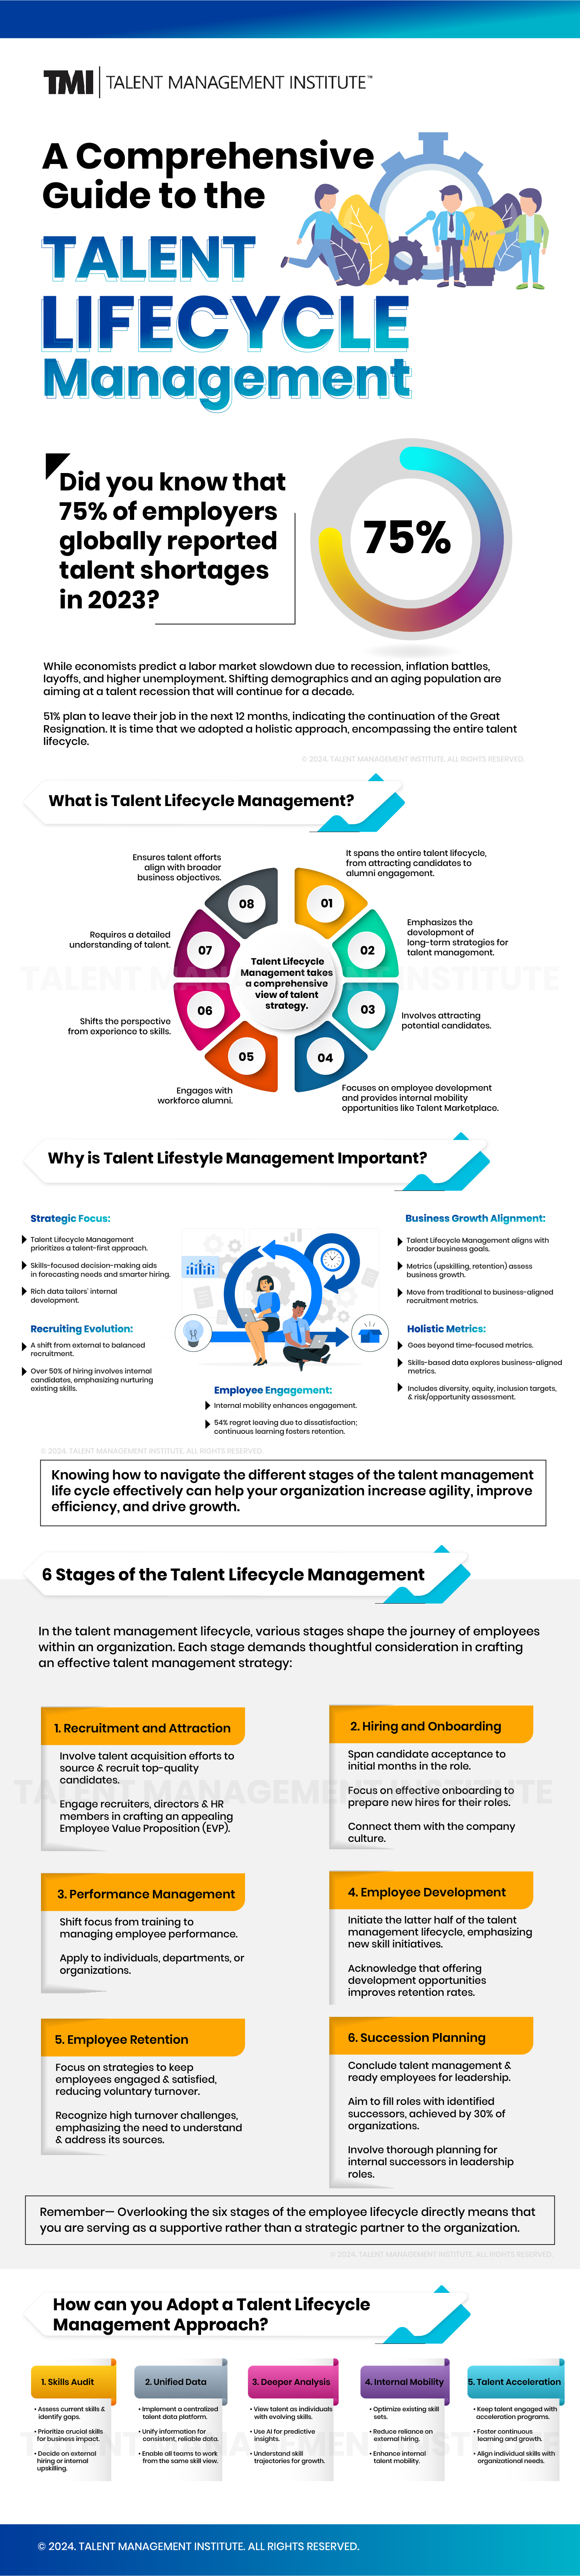 A Comprehensive Guide to the Talent Lifecycle Management